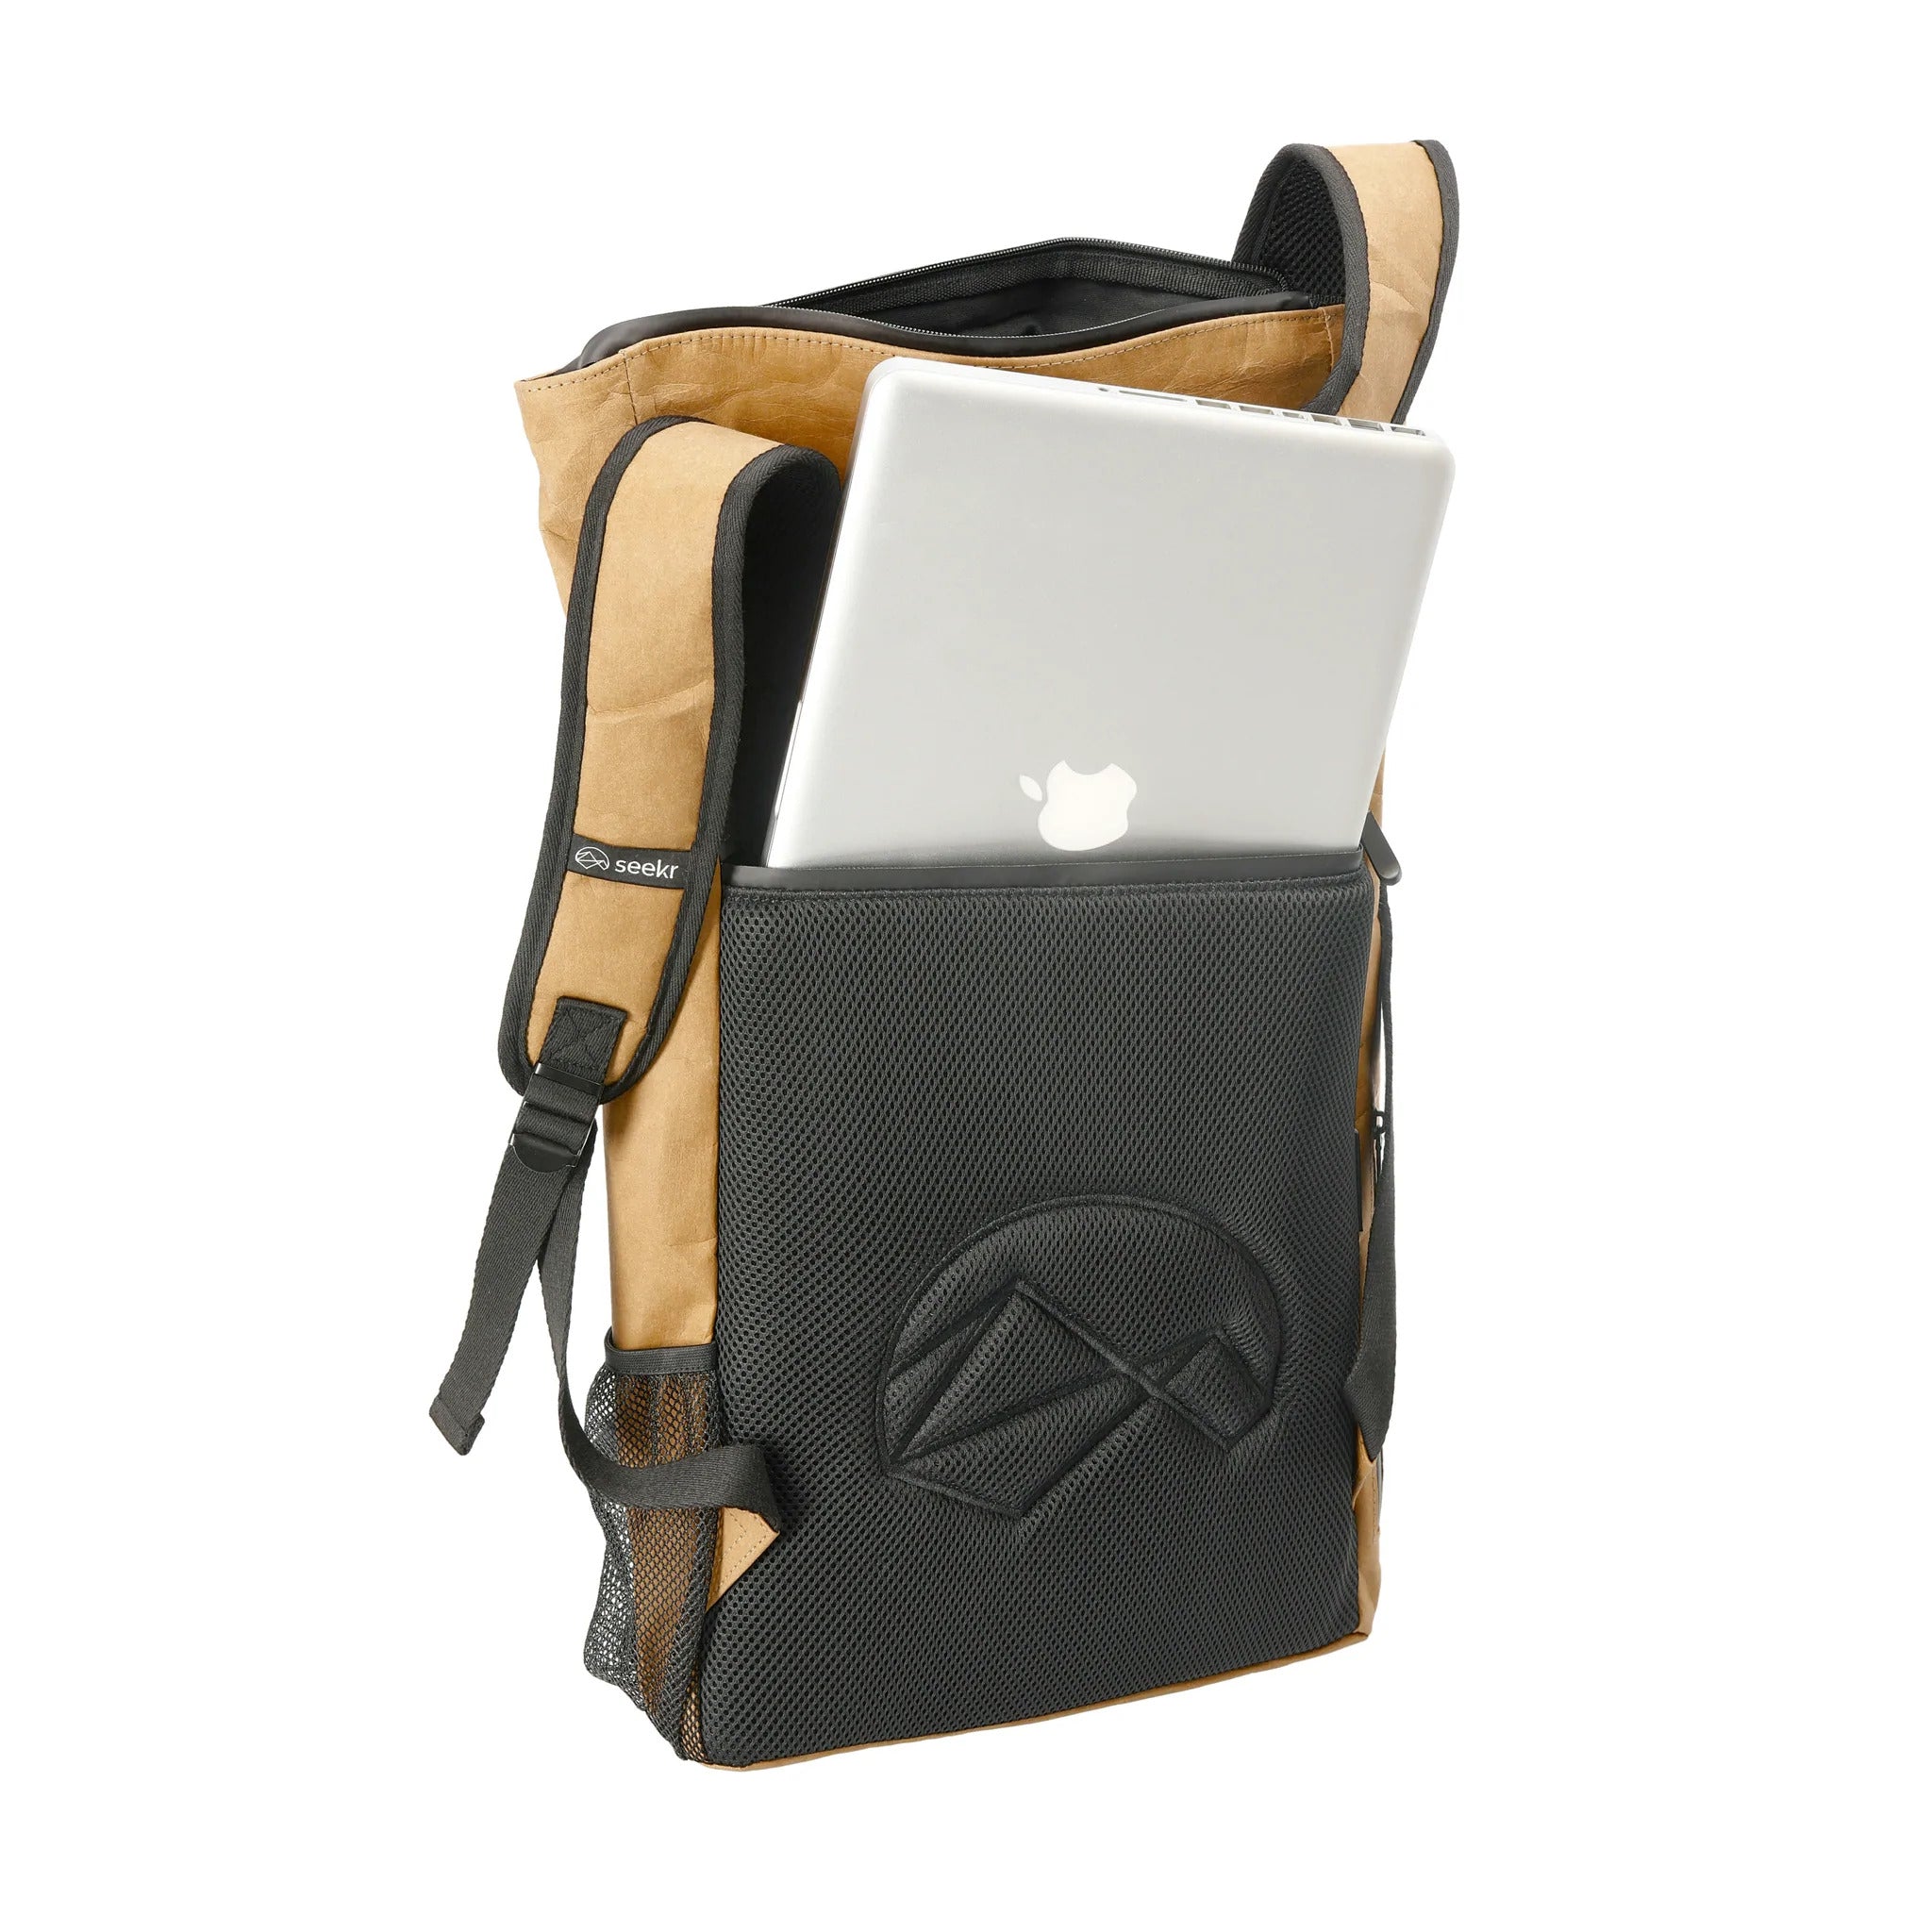 sustainable laptop bag for school